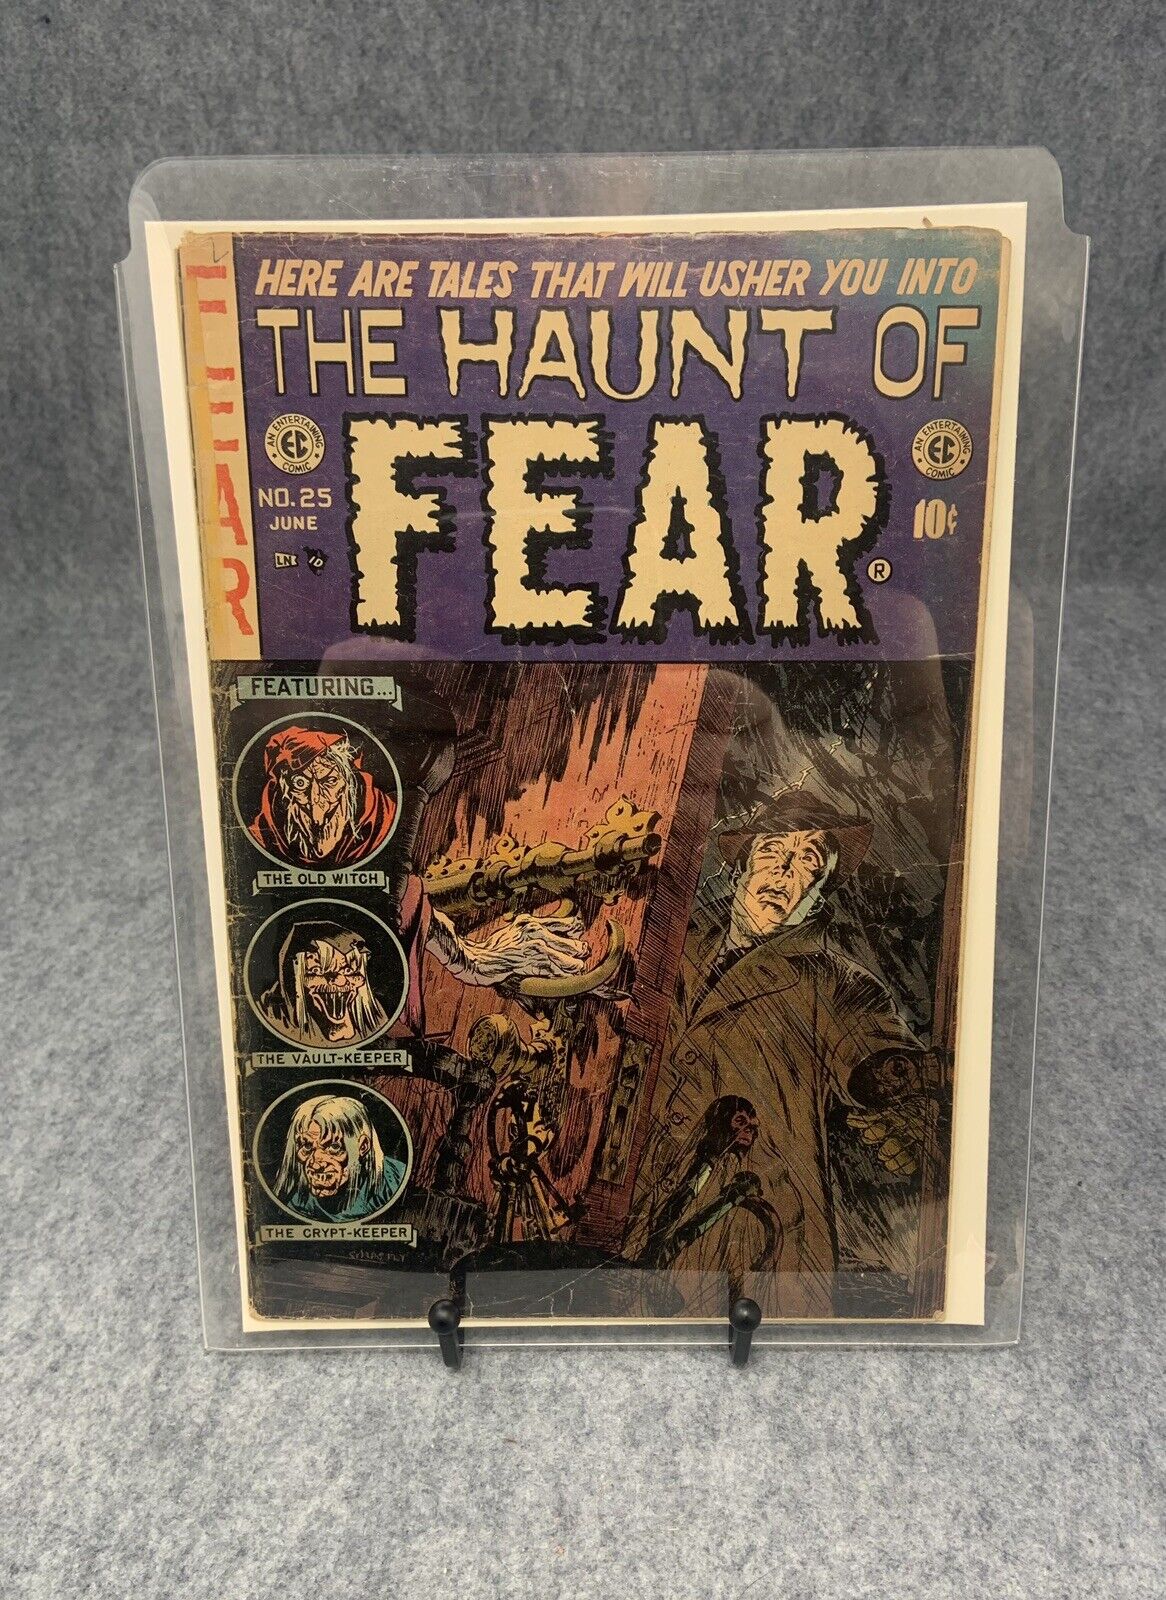 1954 The Haunt of Fear #25 CGC (3.0) G/VG The New Arrival Graham Ingels Art